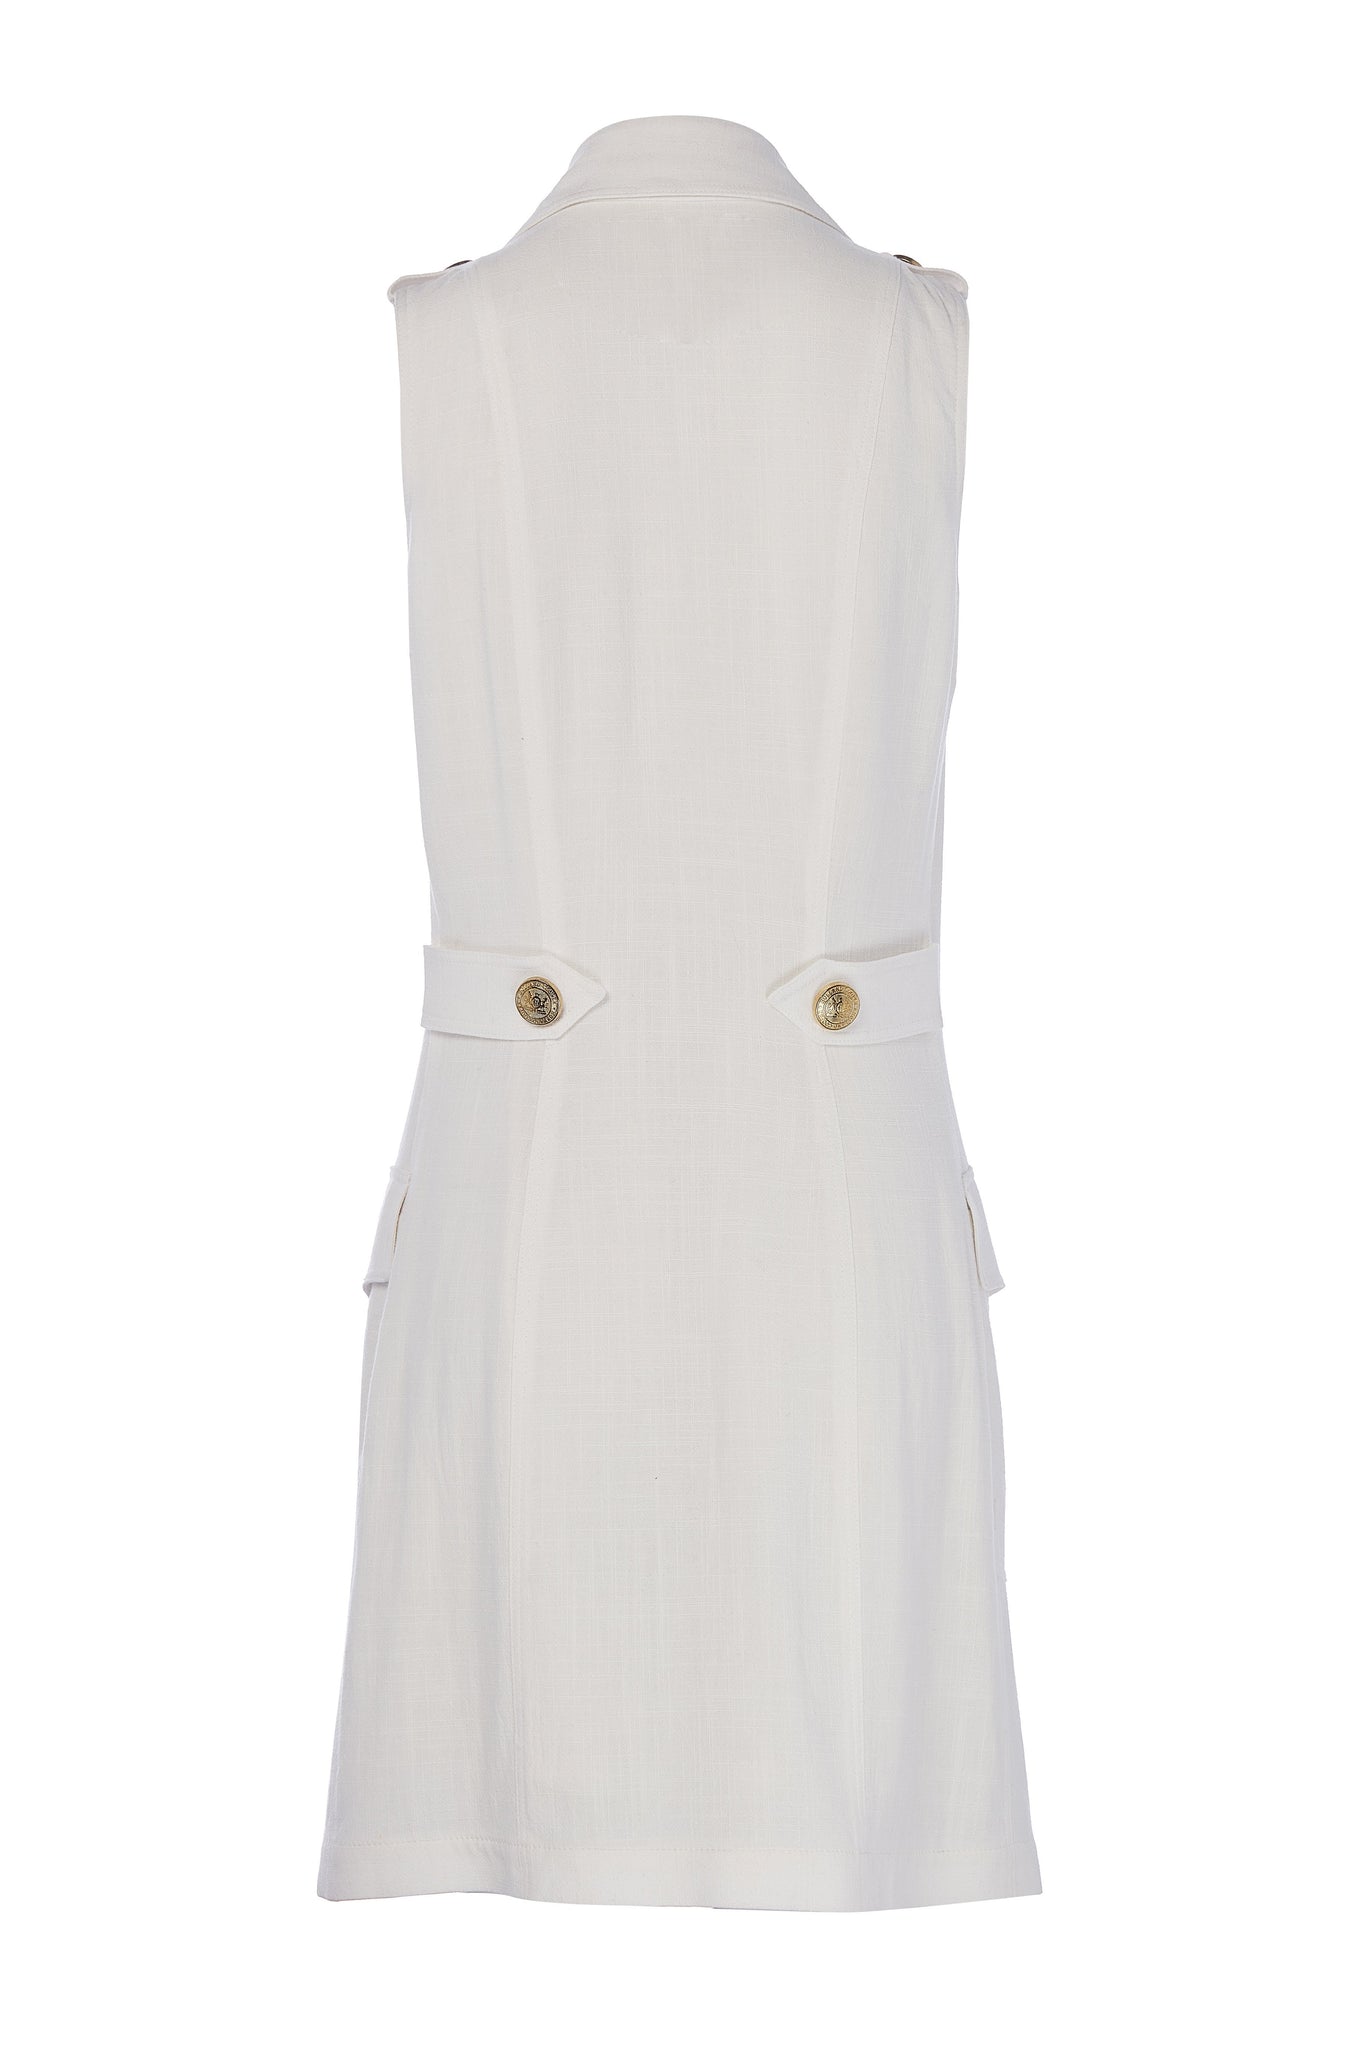 back shot of womens white linen sleeveless collared mini dress with gold button front fastening 